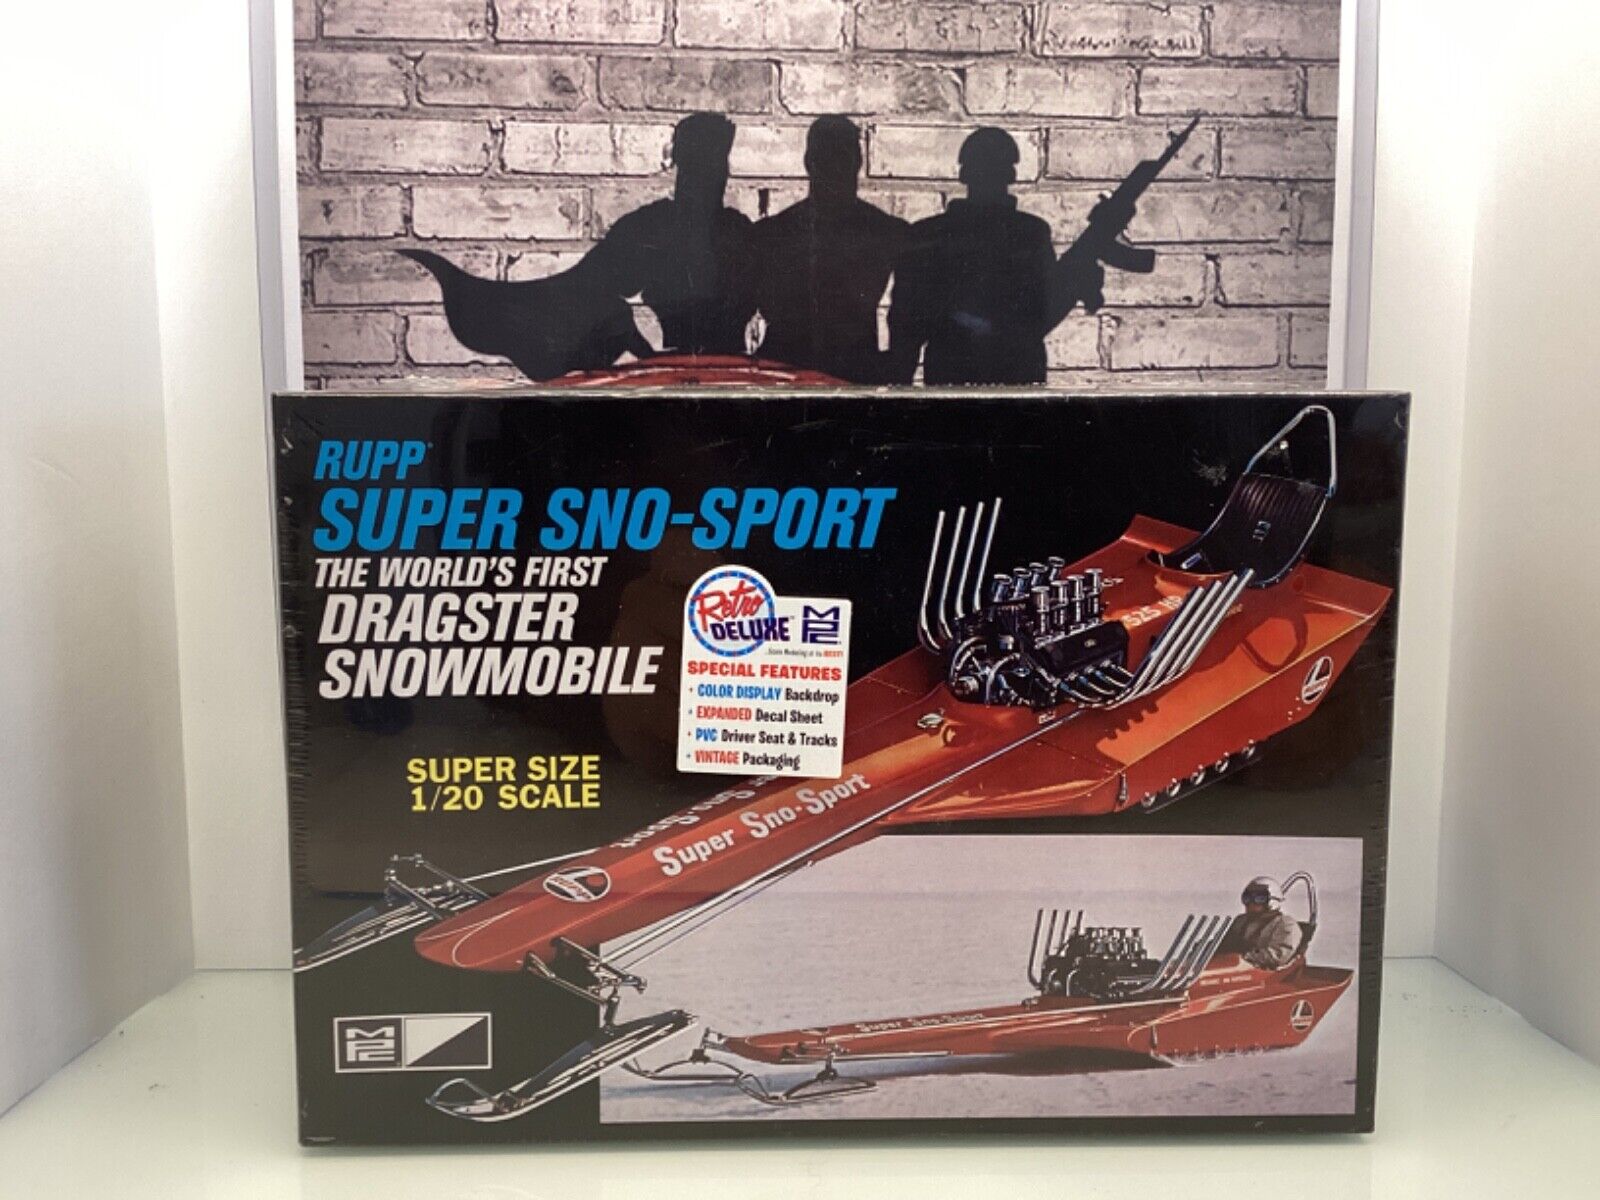 MPC RUPP SUPER SNO-SPORT THE WORLD’S FIRST DRAGSTER SNOWMOBILE 1:20 SCALE